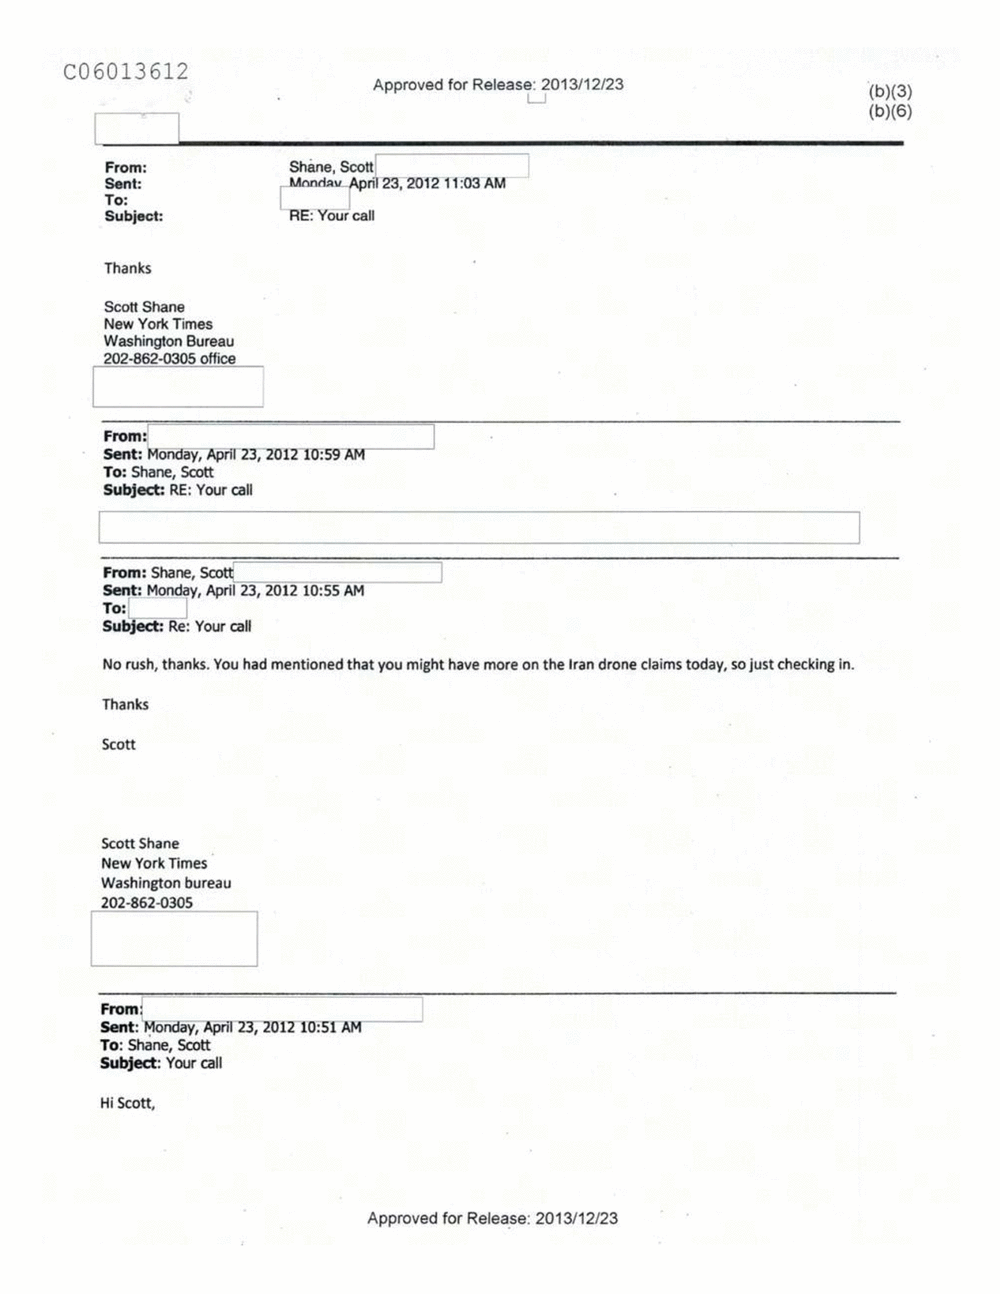 Page 431 from Email Correspondence Between Reporters and CIA Flacks